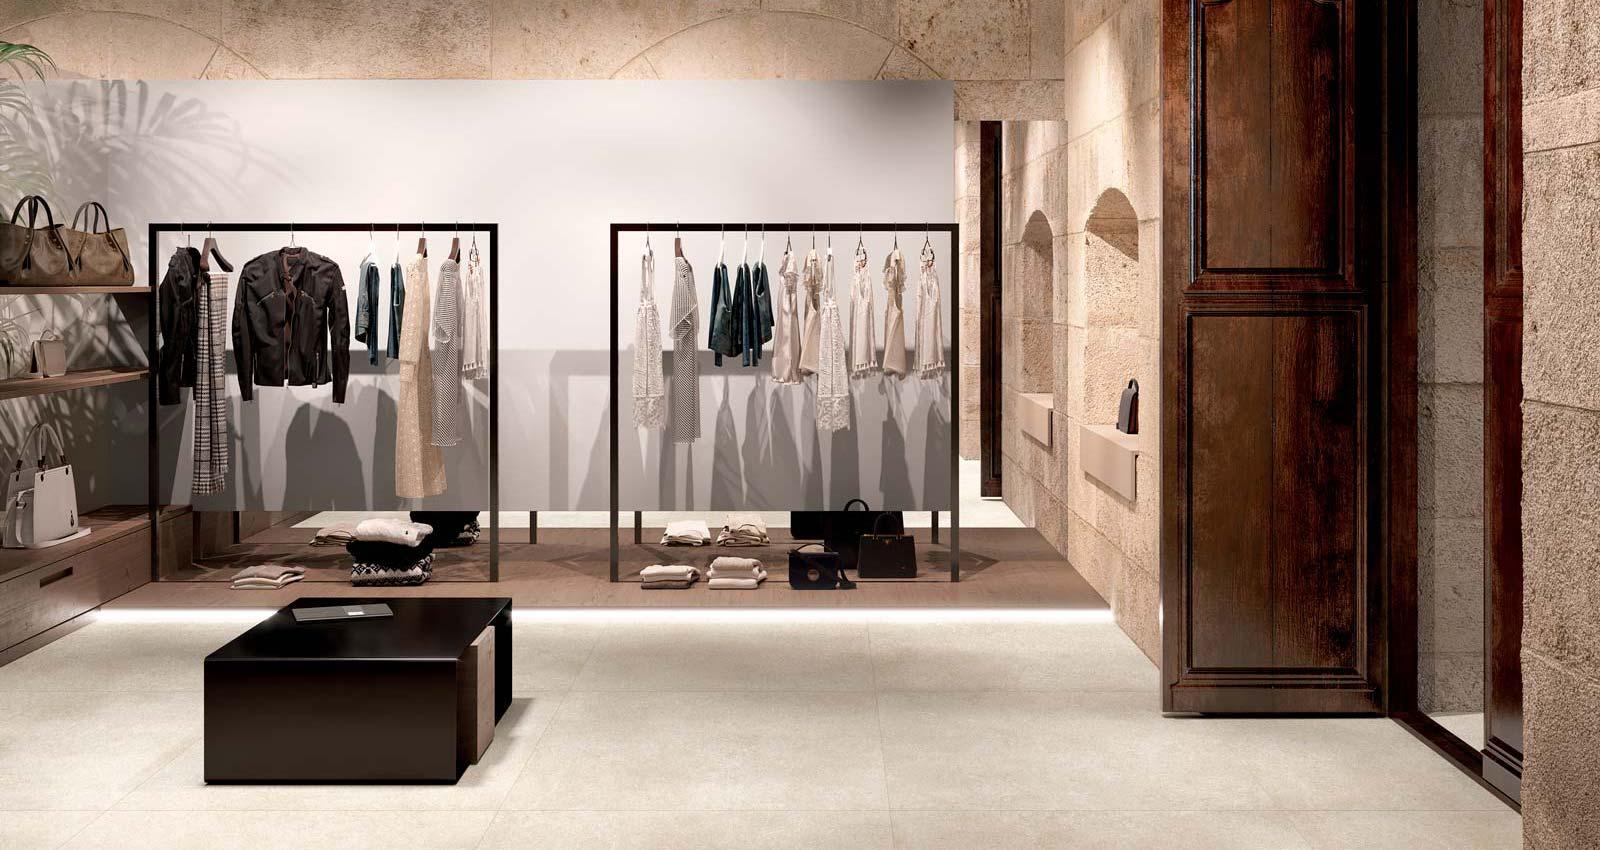 limestone effect tiles , commercial usage , clothing shop with a clean aesthetic , beige aestheitc